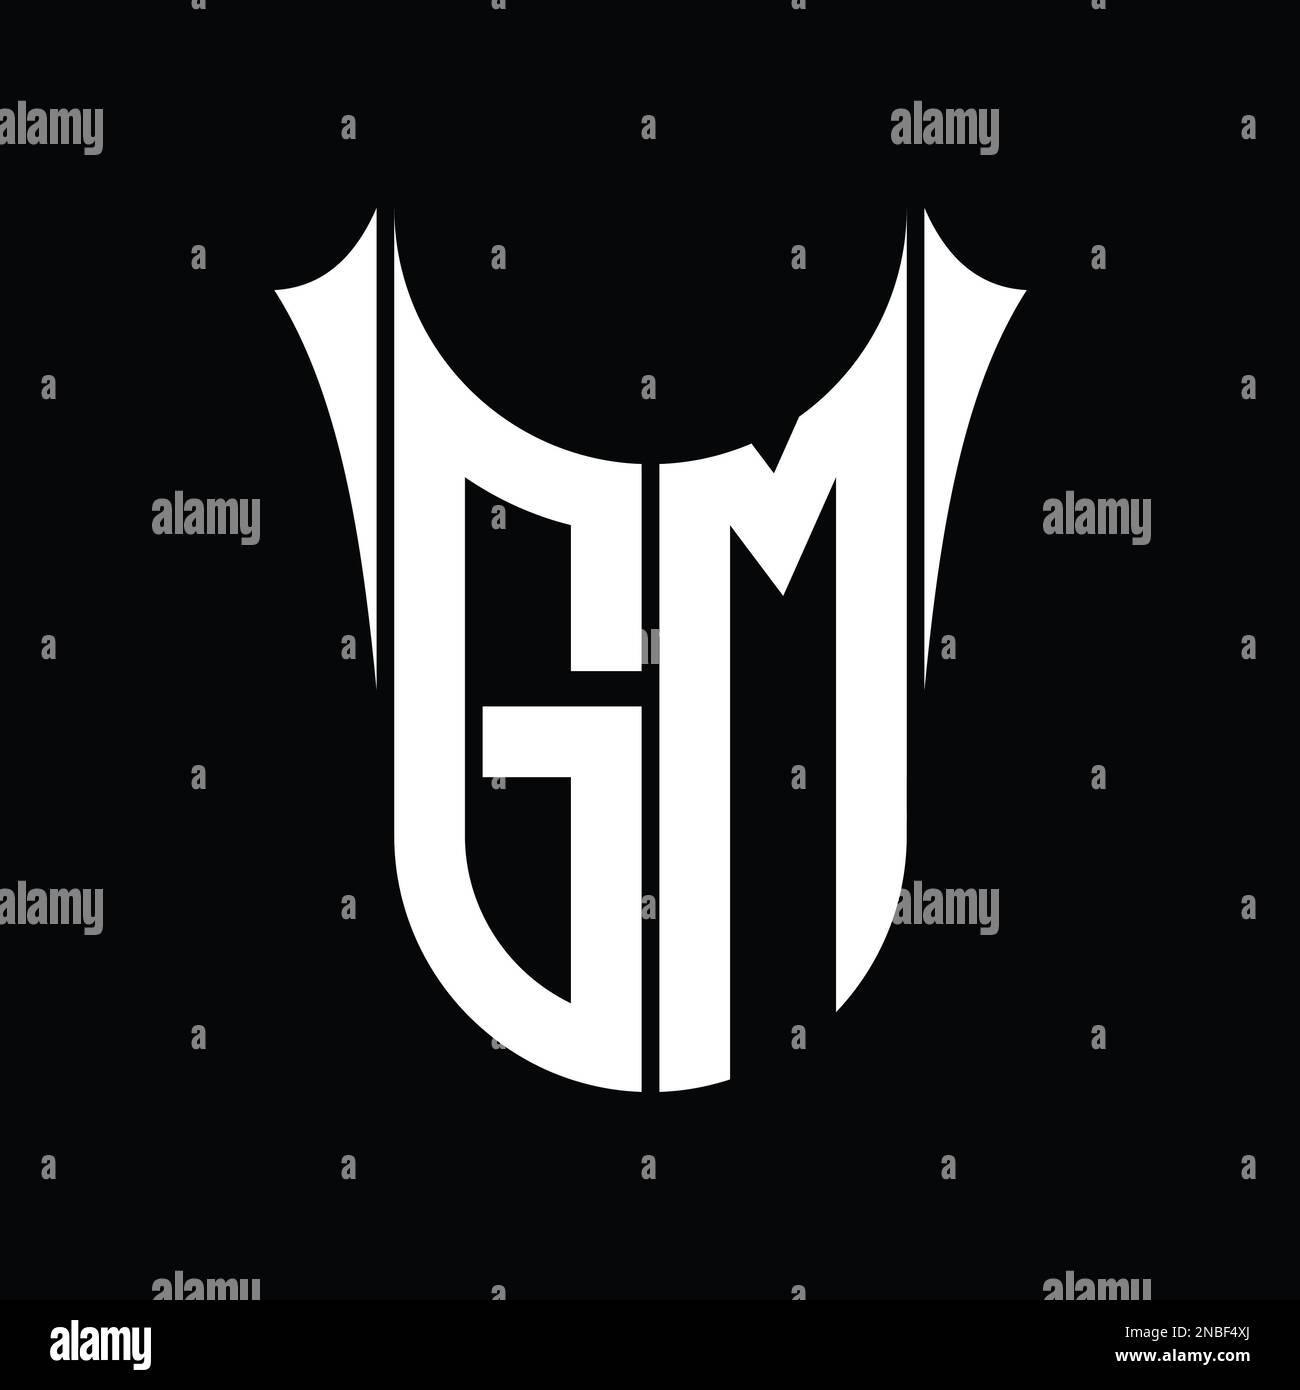 General motors logo Cut Out Stock Images & Pictures - Alamy